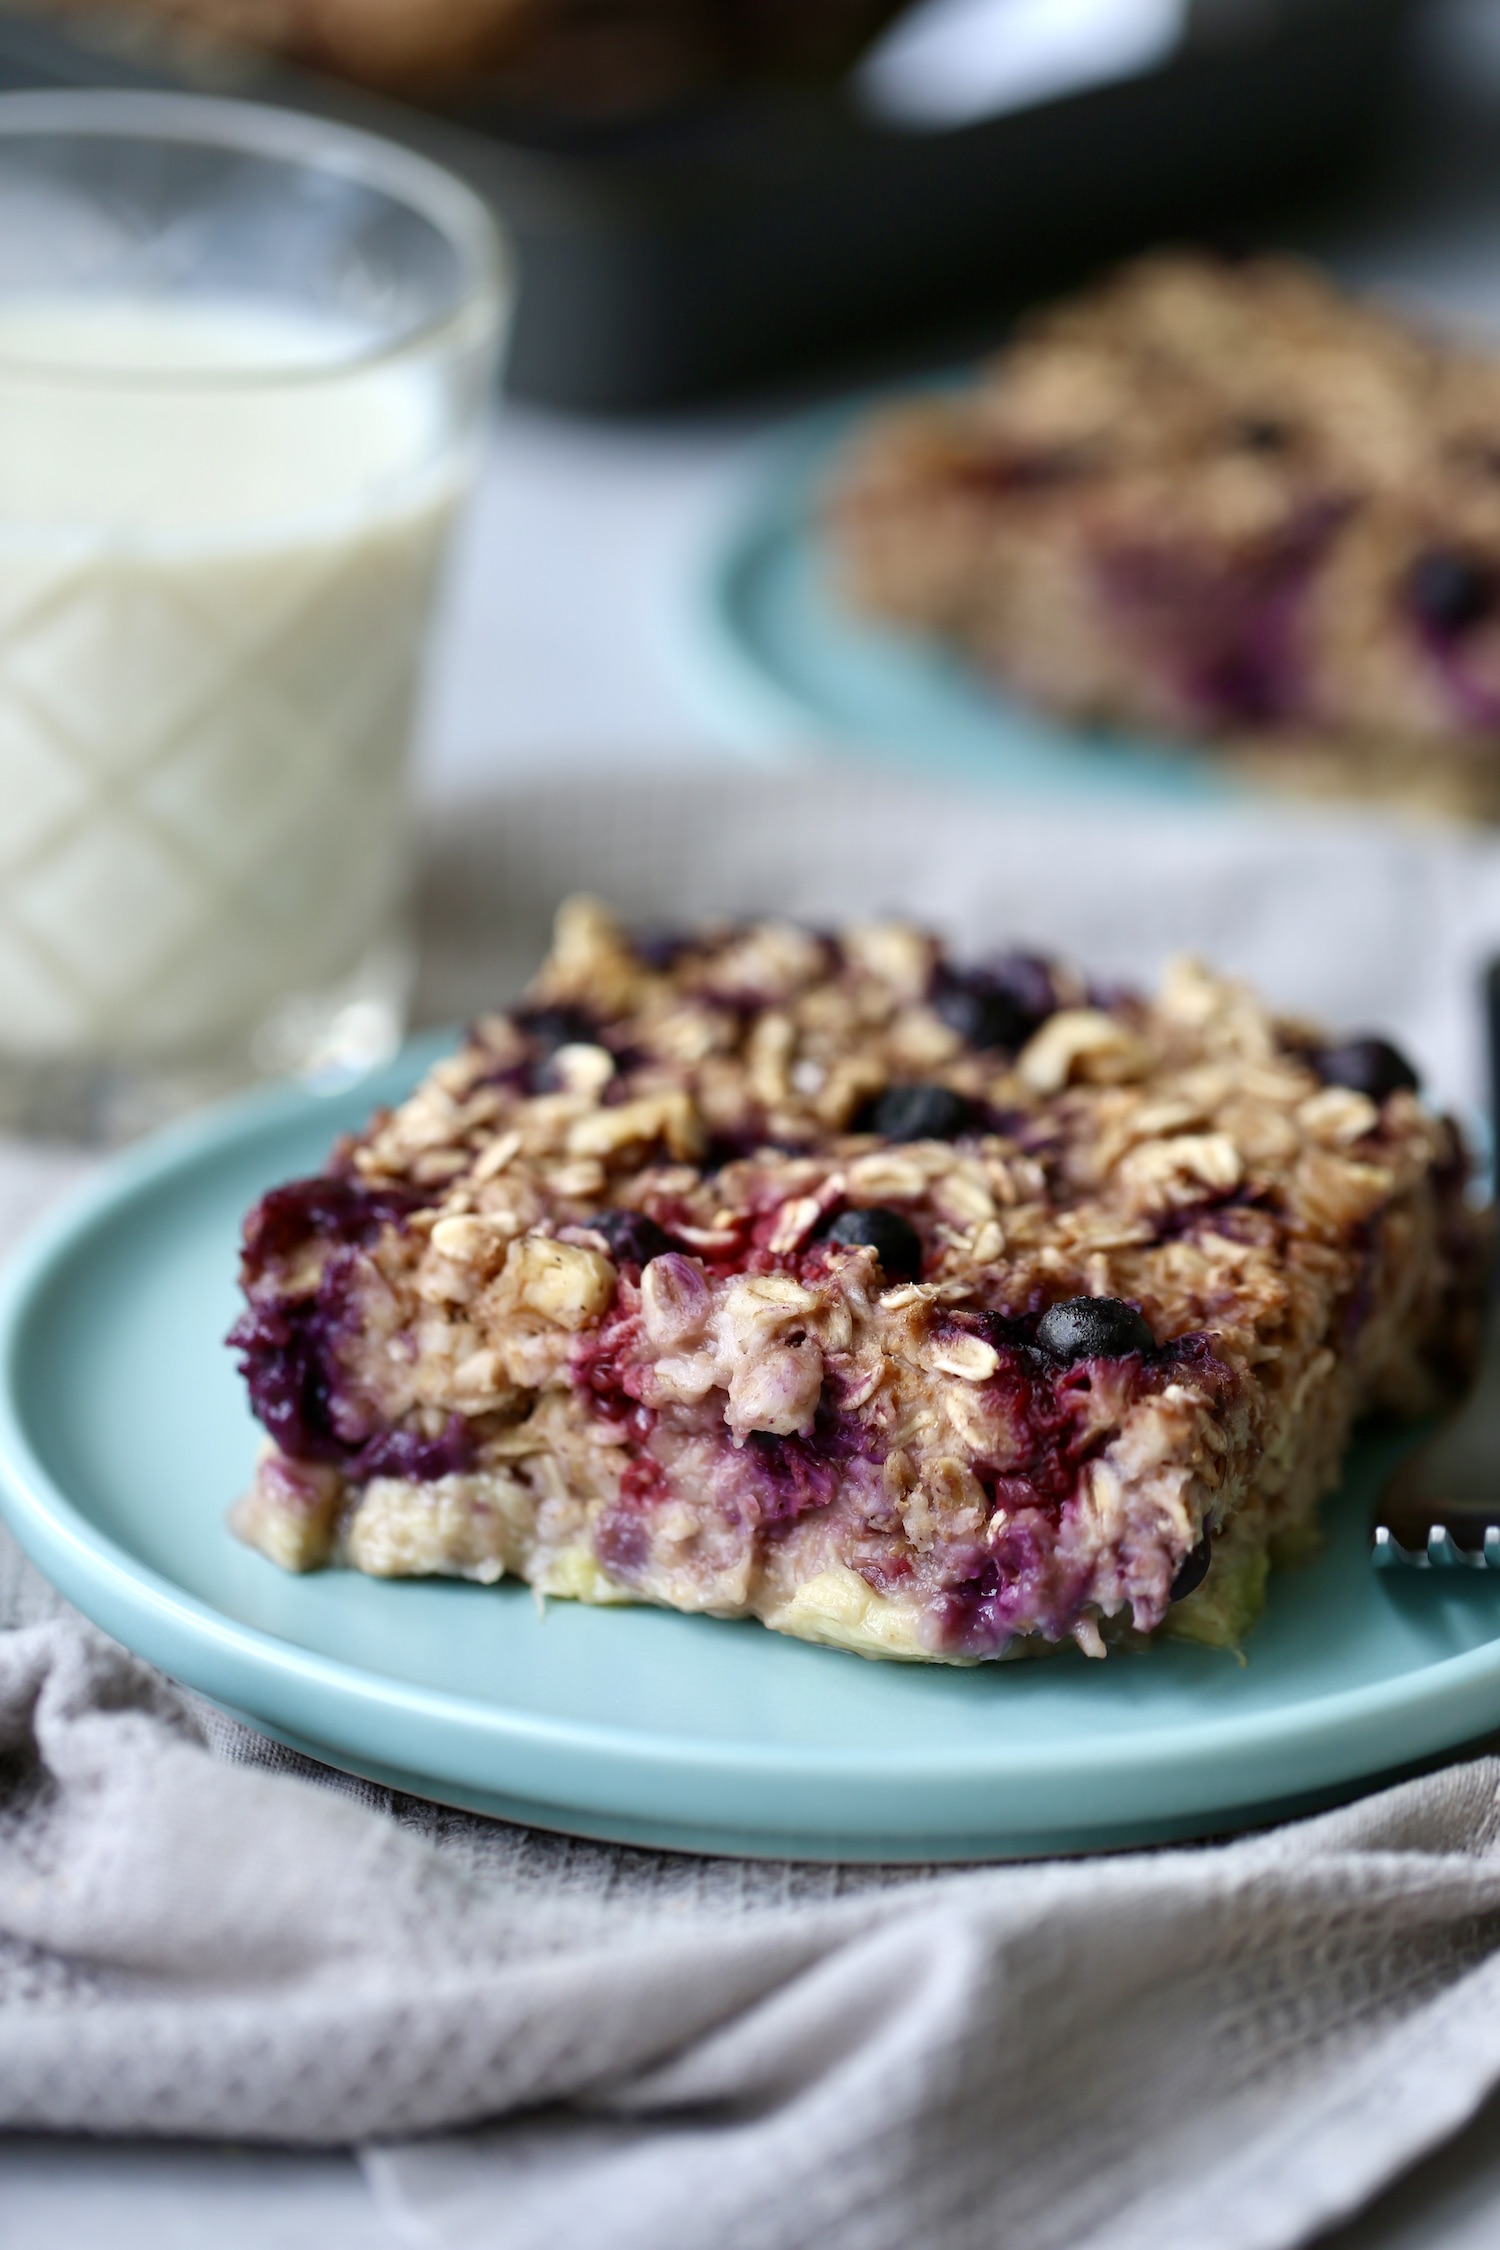 a thick slice of baked oatmeal with berries and walnuts